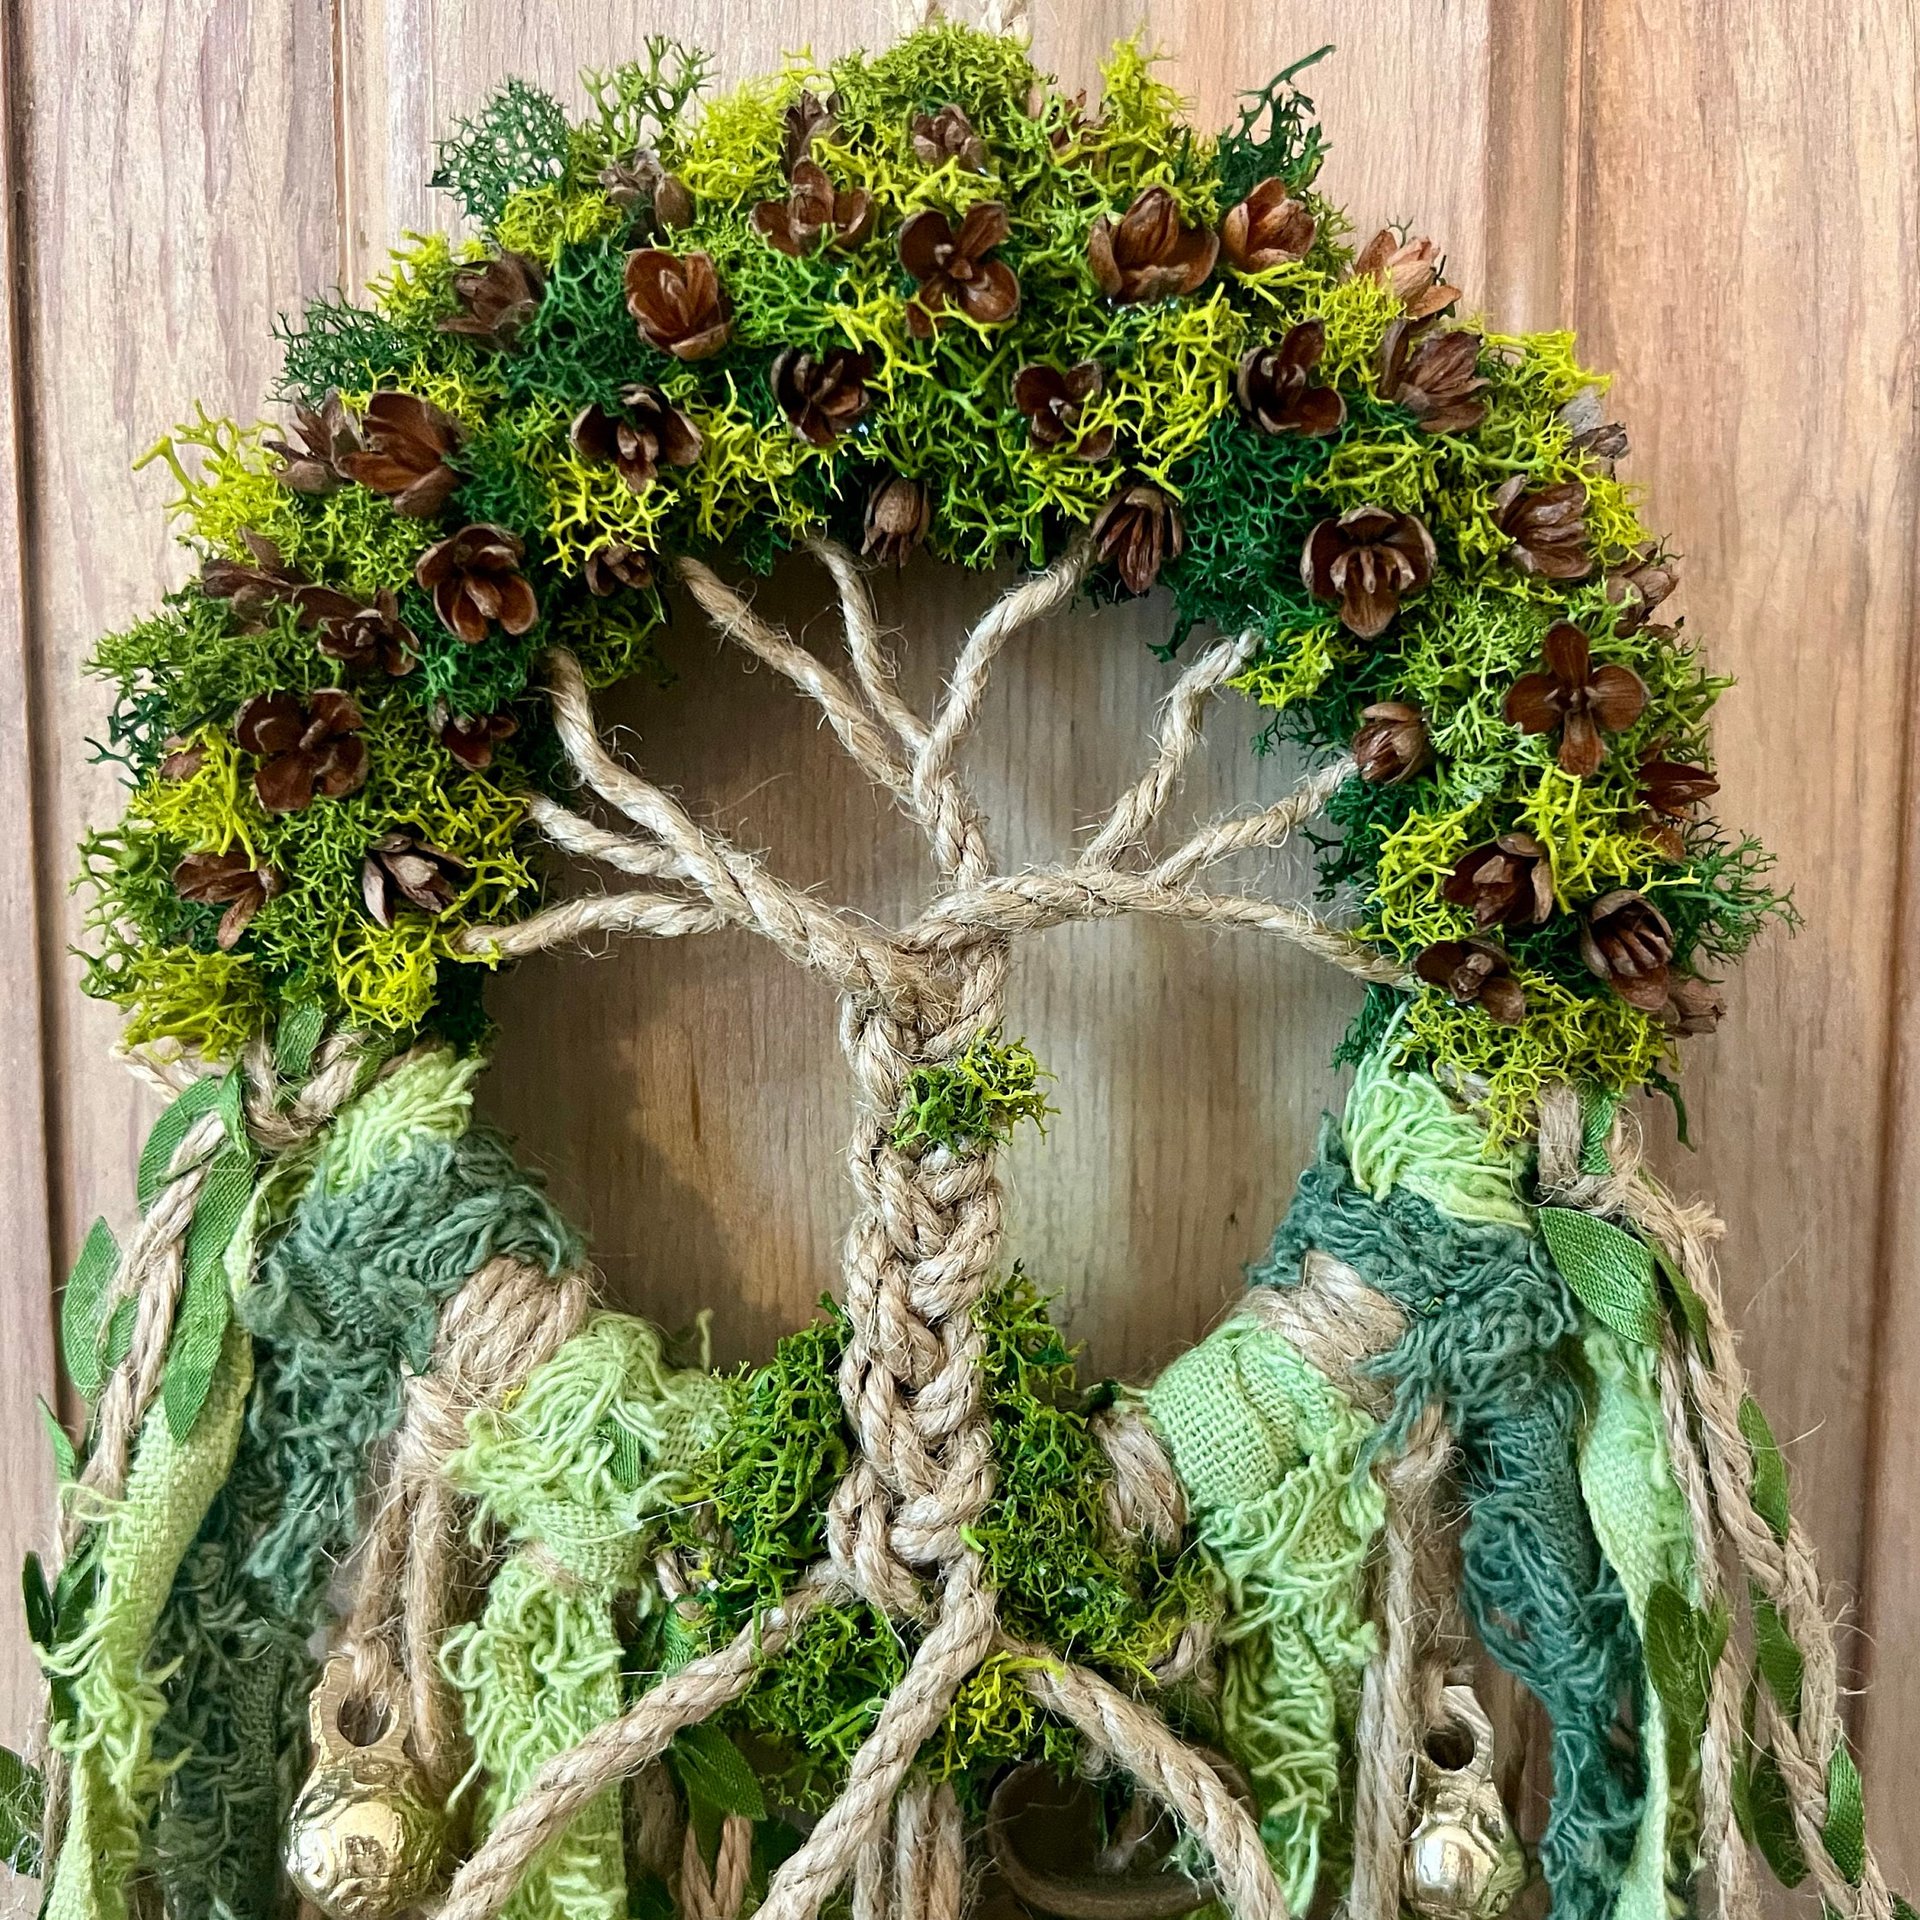 Tree of Life Witch Bells, Home & Door Protection, Doorknob Hanger, 5 Inch Mossy Wreath, Housewarming Gifts, Spirit Altar Bells, Recycled Ribbons